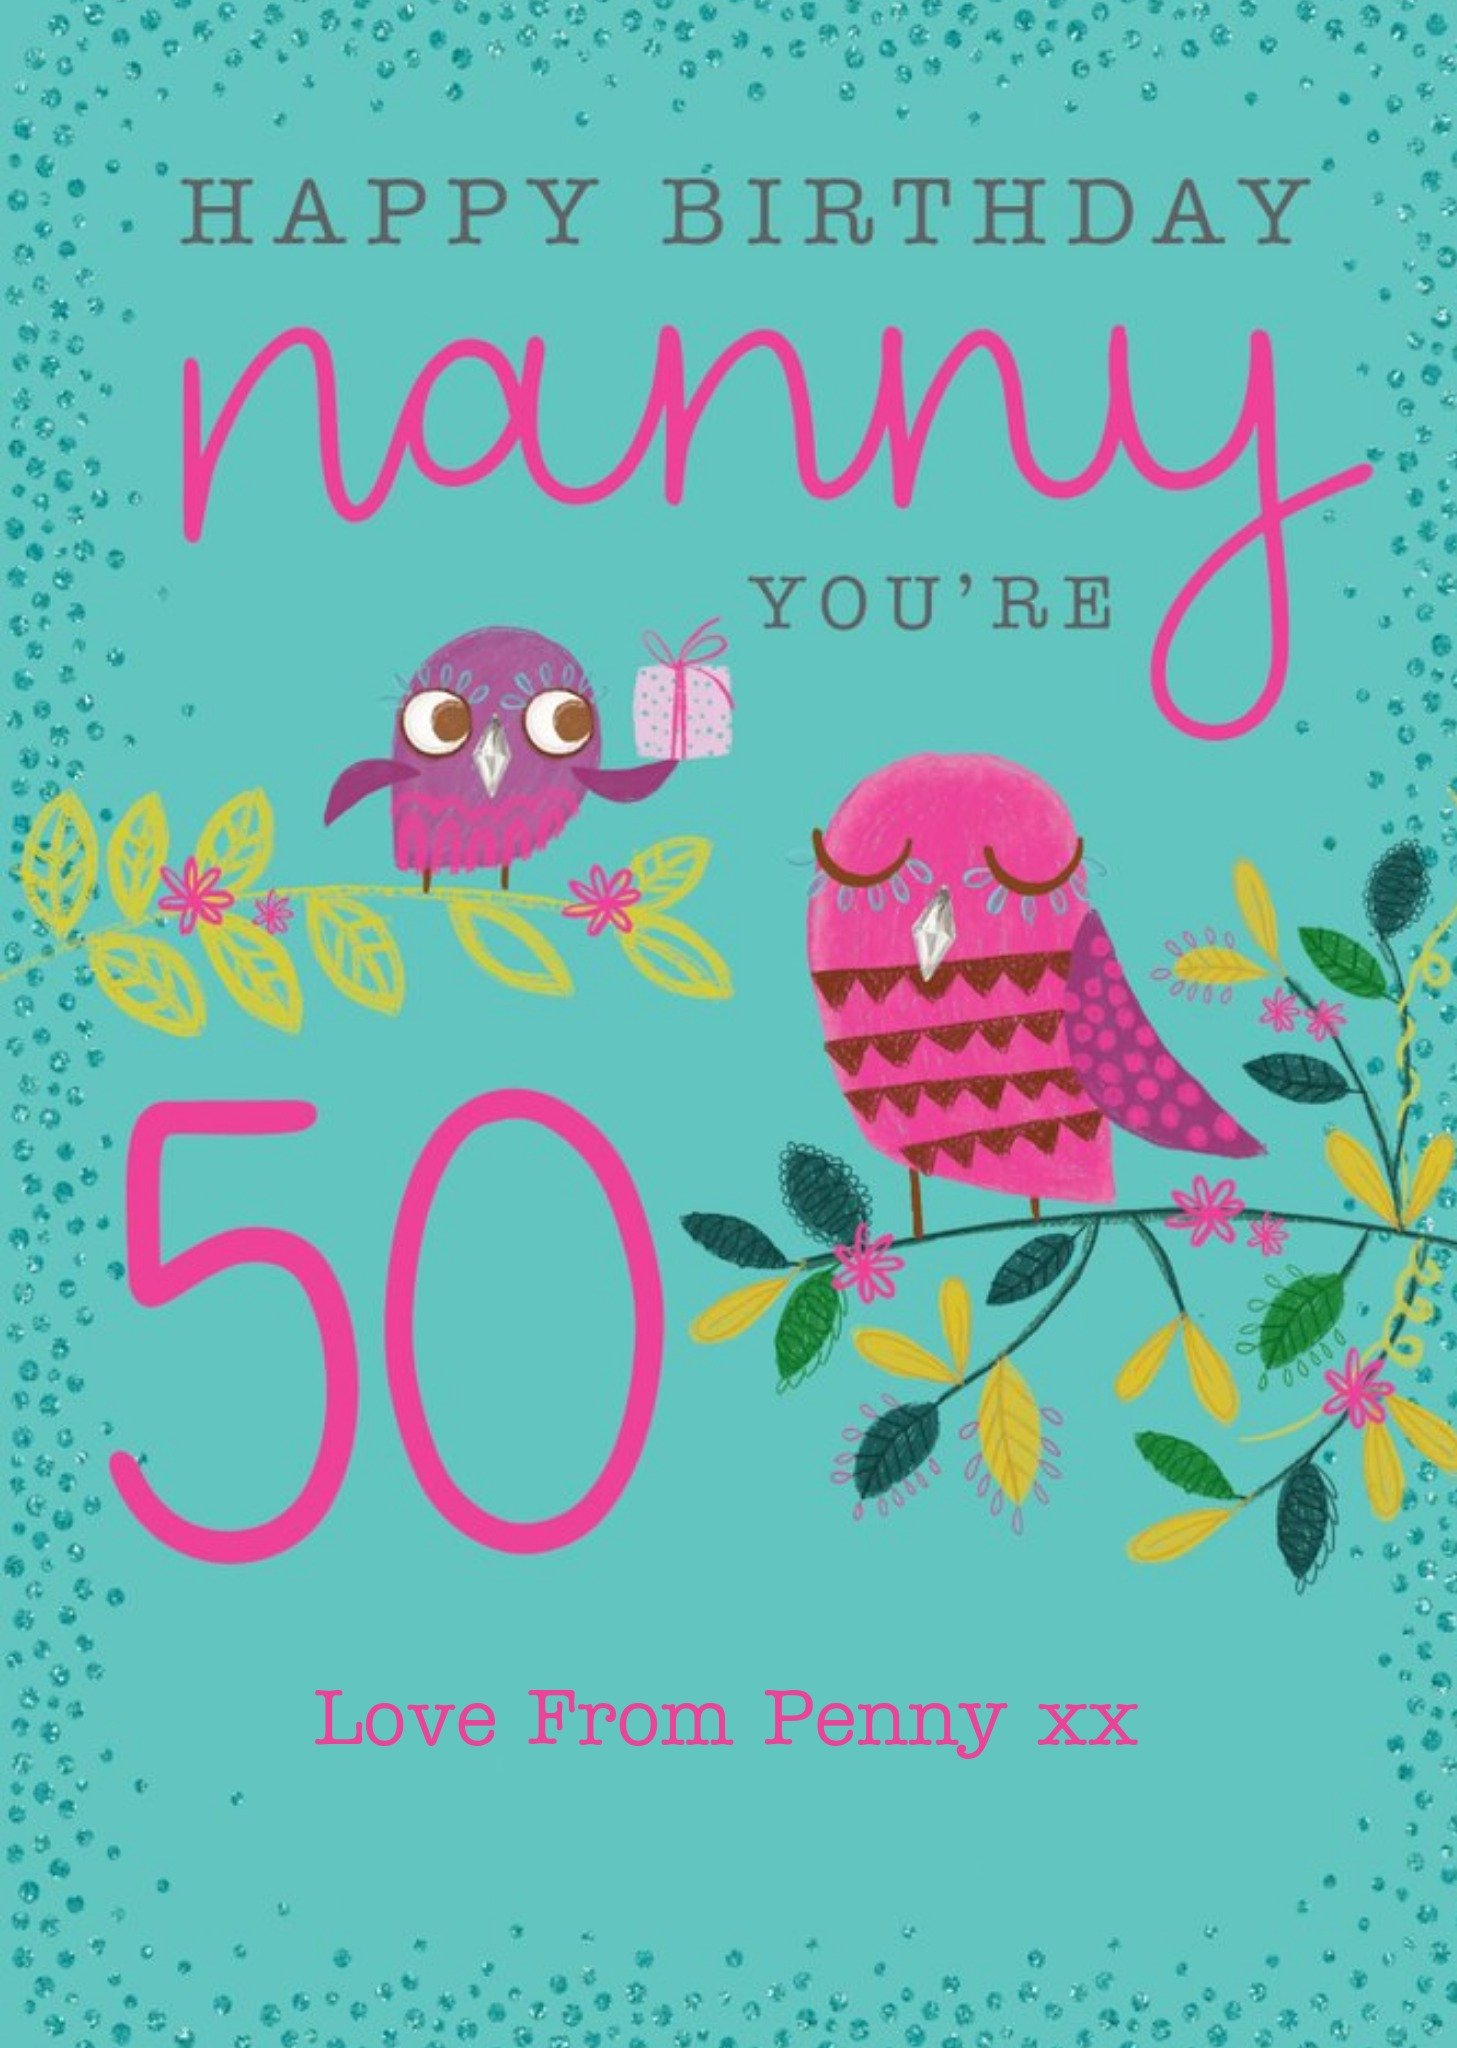 Moonpig Clintons Nanny Illustrated Colourful Birds 50th Birthday Card, Large